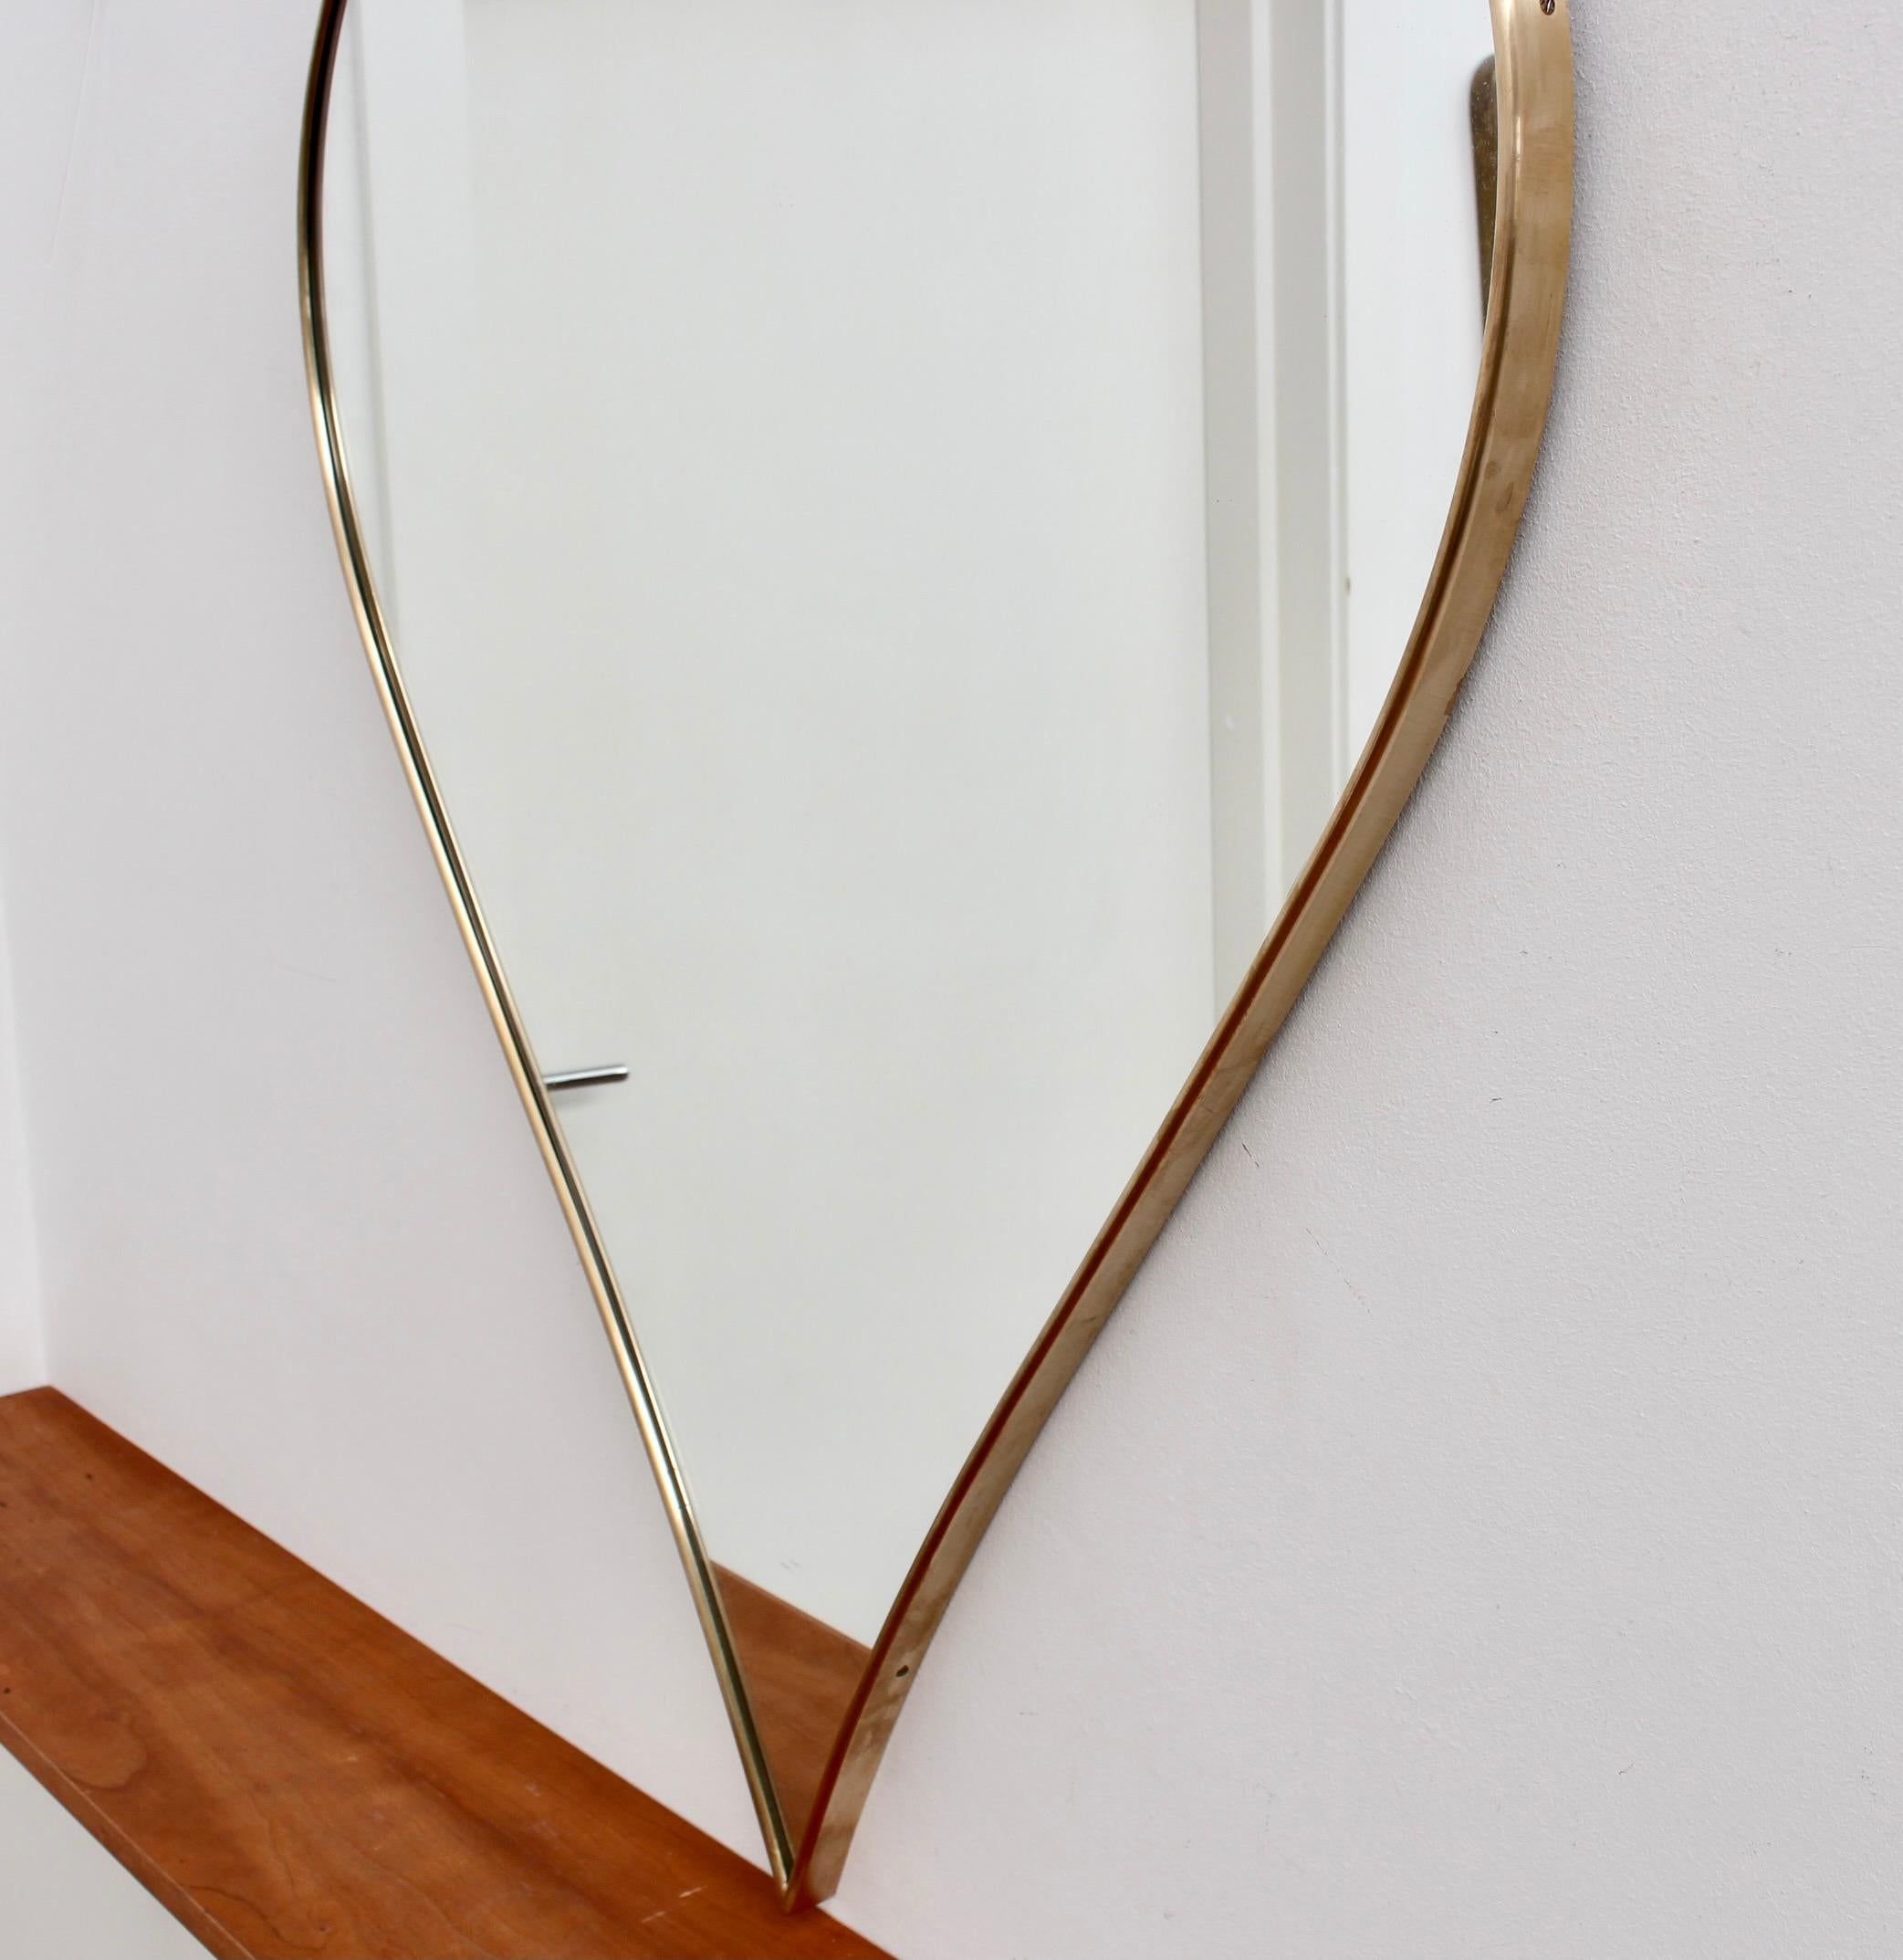 Pair of Vintage Italian Heart-Shaped Wall Mirrors with Brass Frames, c. 1960s 5